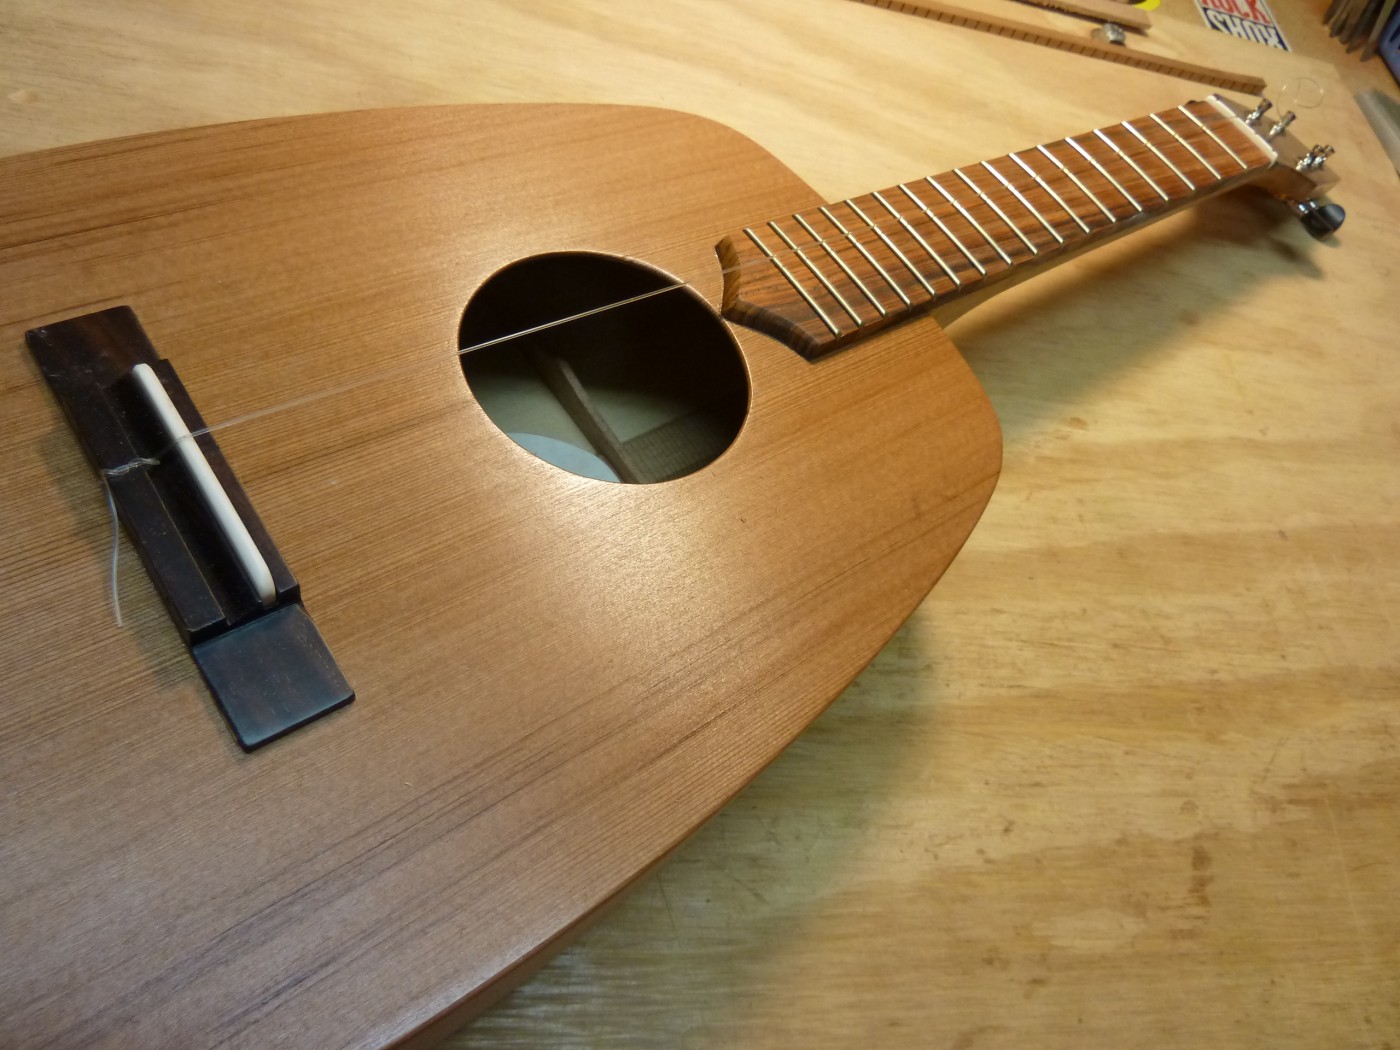 Matanuska – Neck and soundboard done…it’s time to paint!